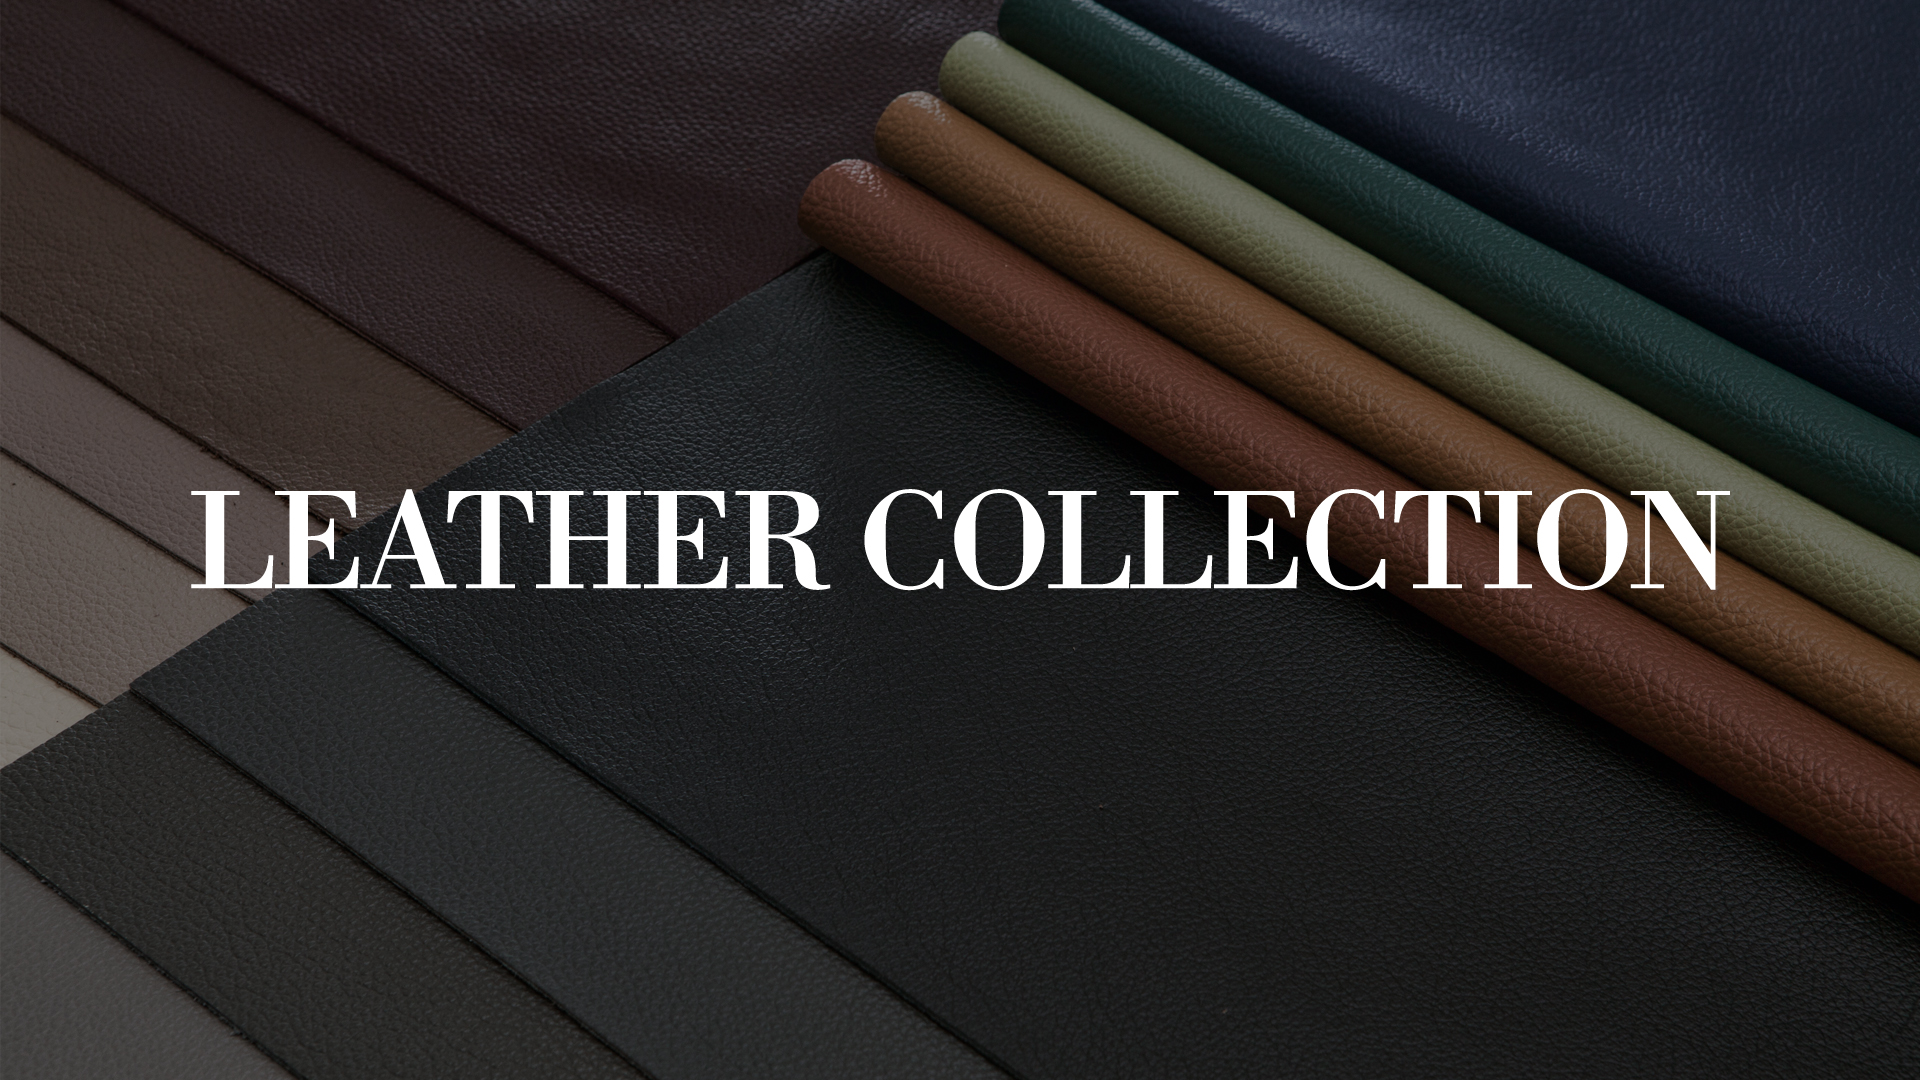 Leather Collection | Fine leather furniture for design furnishings